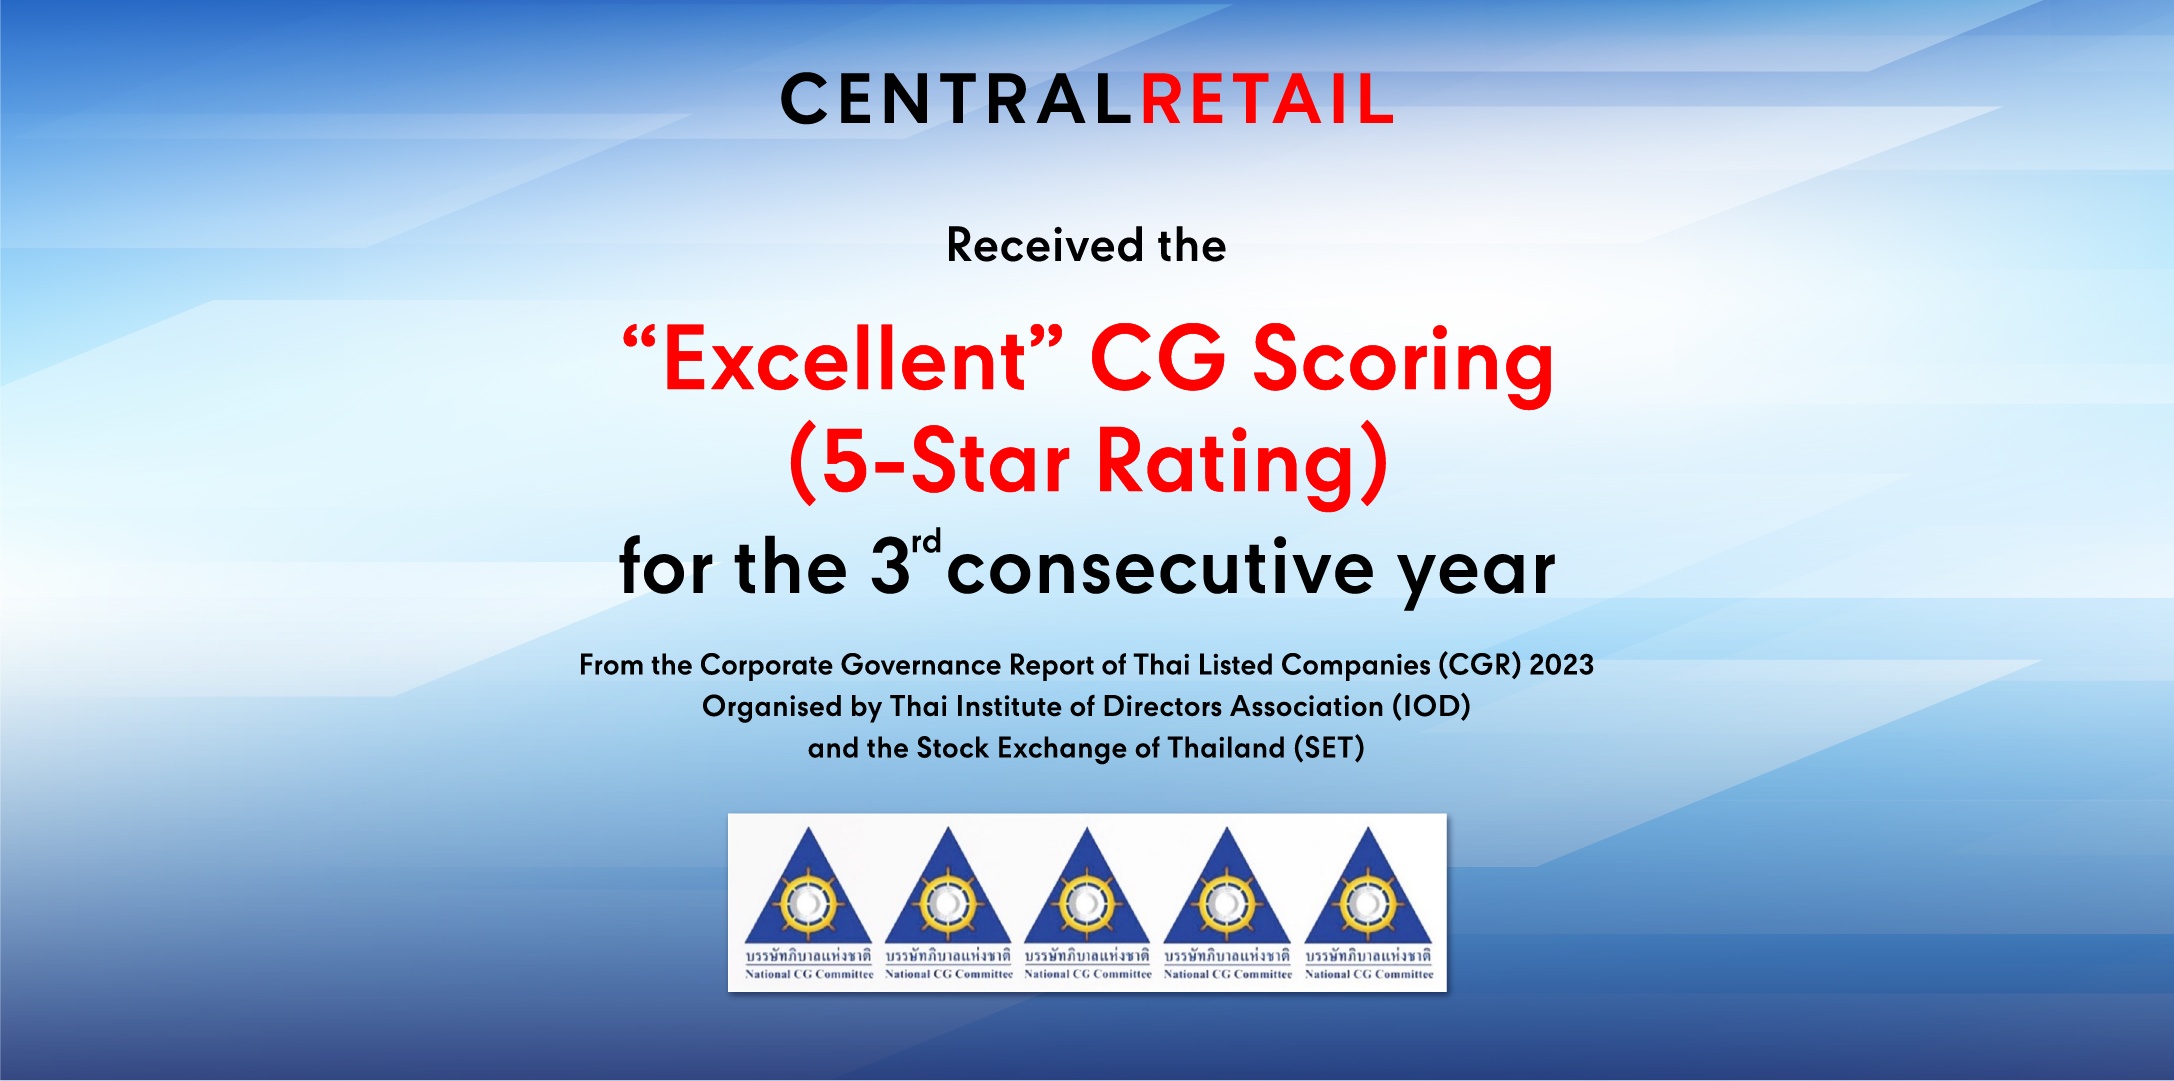 Central Retail received “Excellent” CG Scoring (5-Star Rating) for the 3rd consecutive year